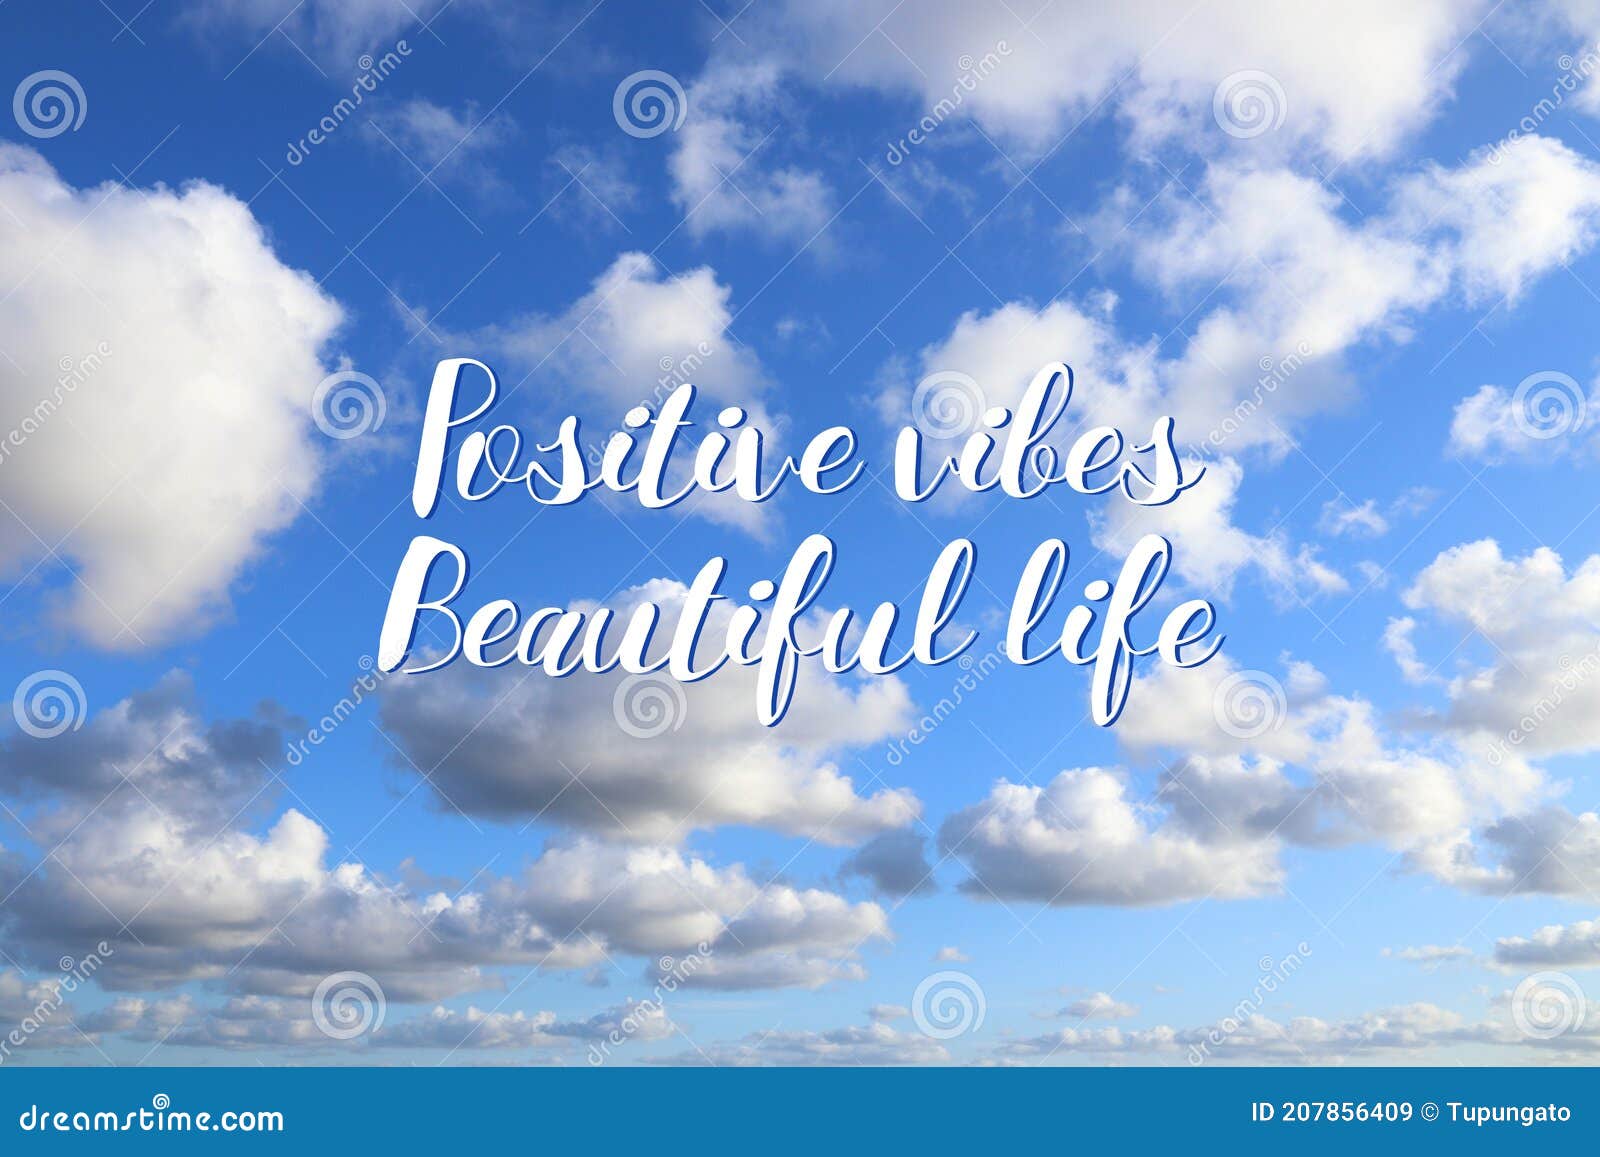 Positive vibes poster stock image. Image of creative - 207856409